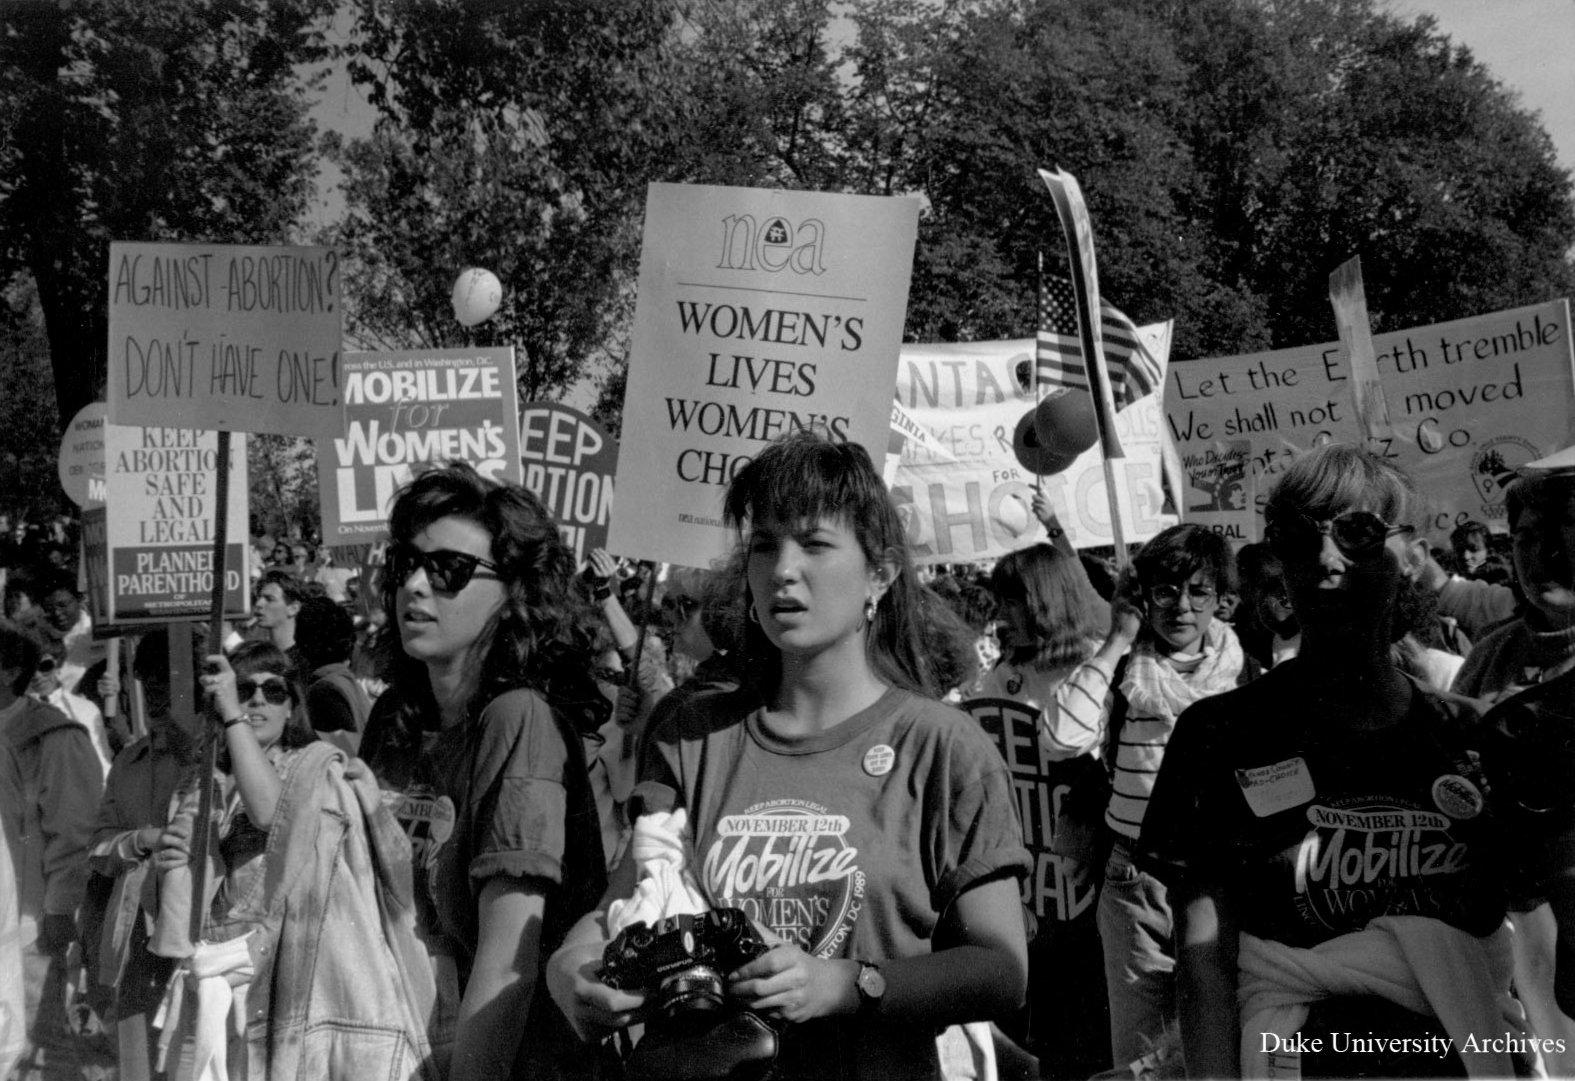 Black and white image of a women's rights demonstration related to reproductive health